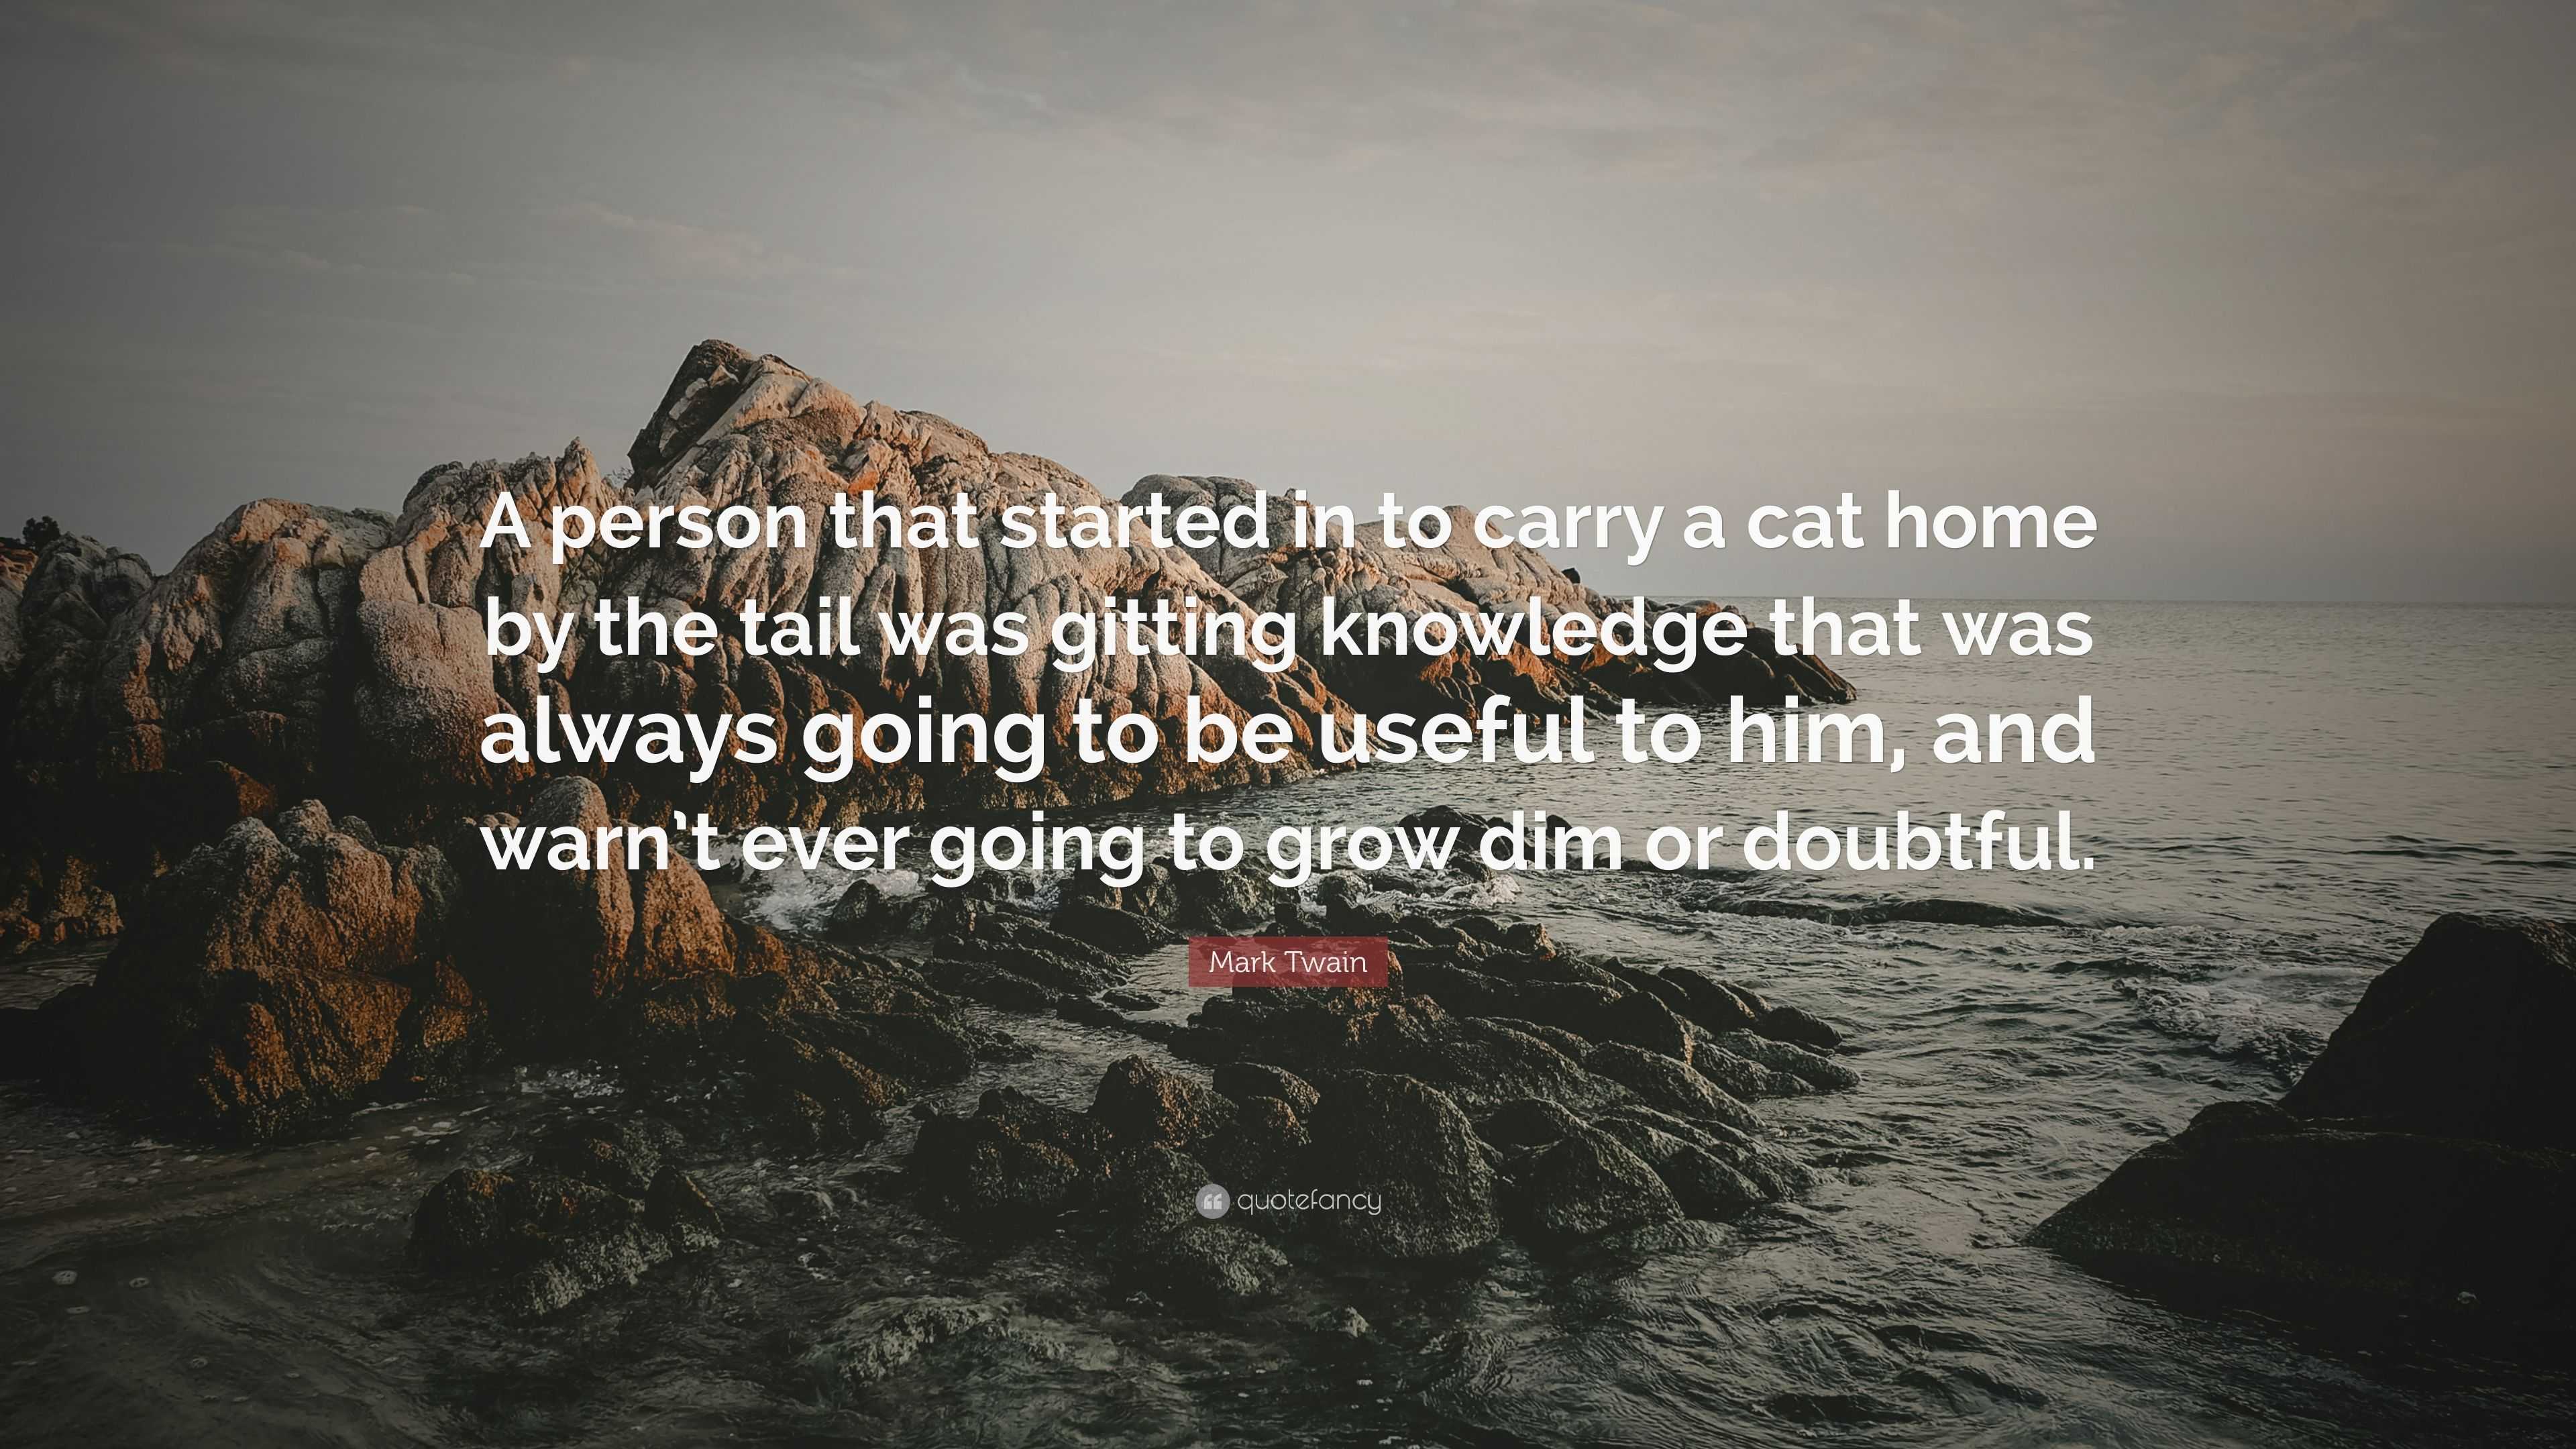 Mark Twain Quote: “A person that started in to carry a cat home by the